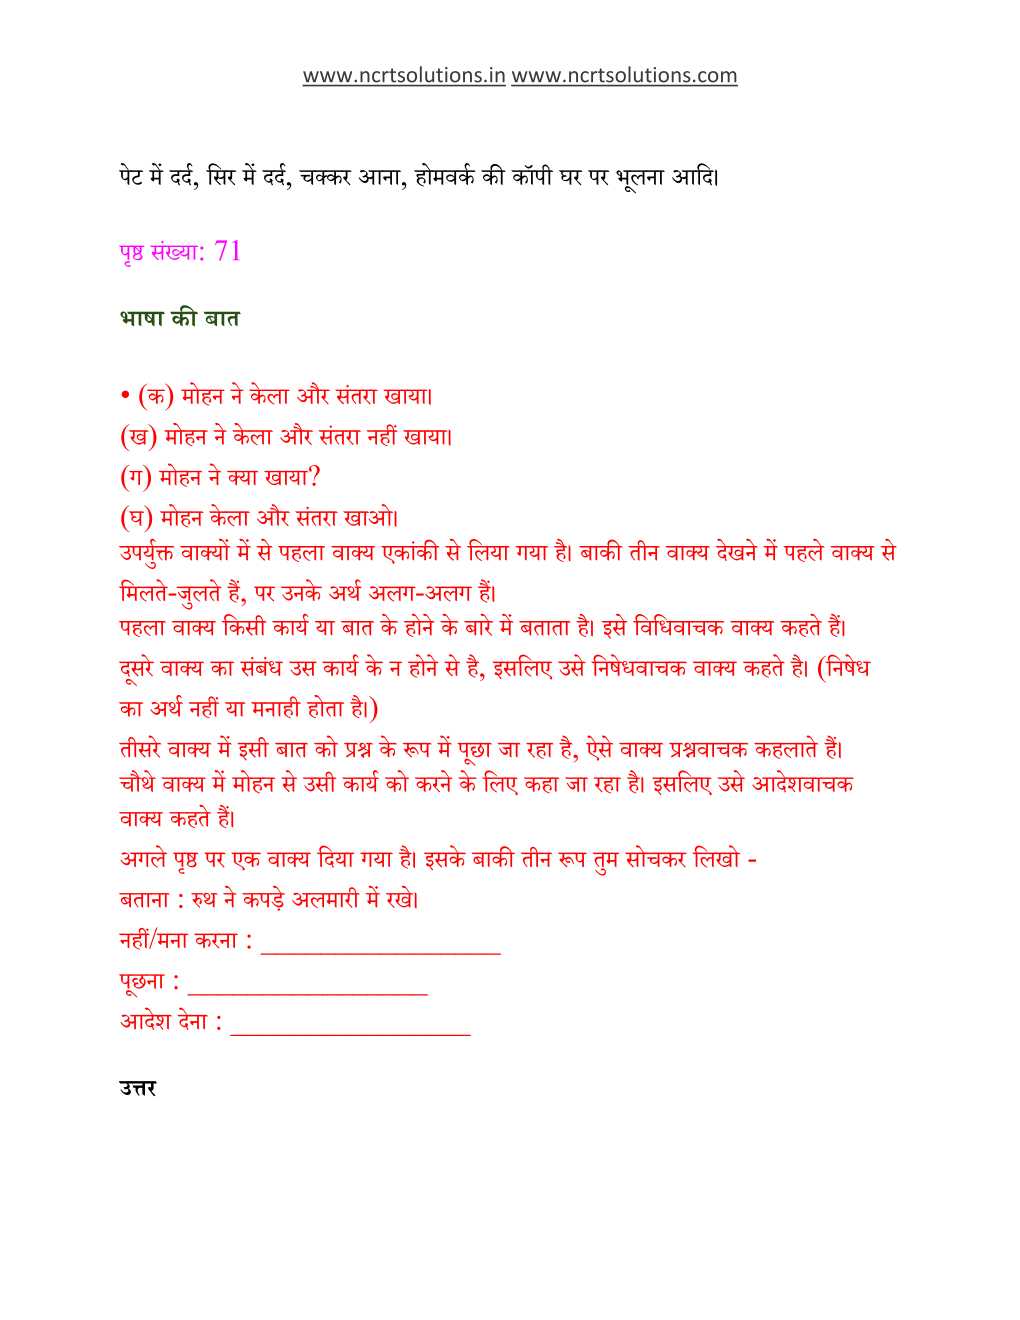 NCERT Solutions For Class 6 Hindi Vasant Chapter 8